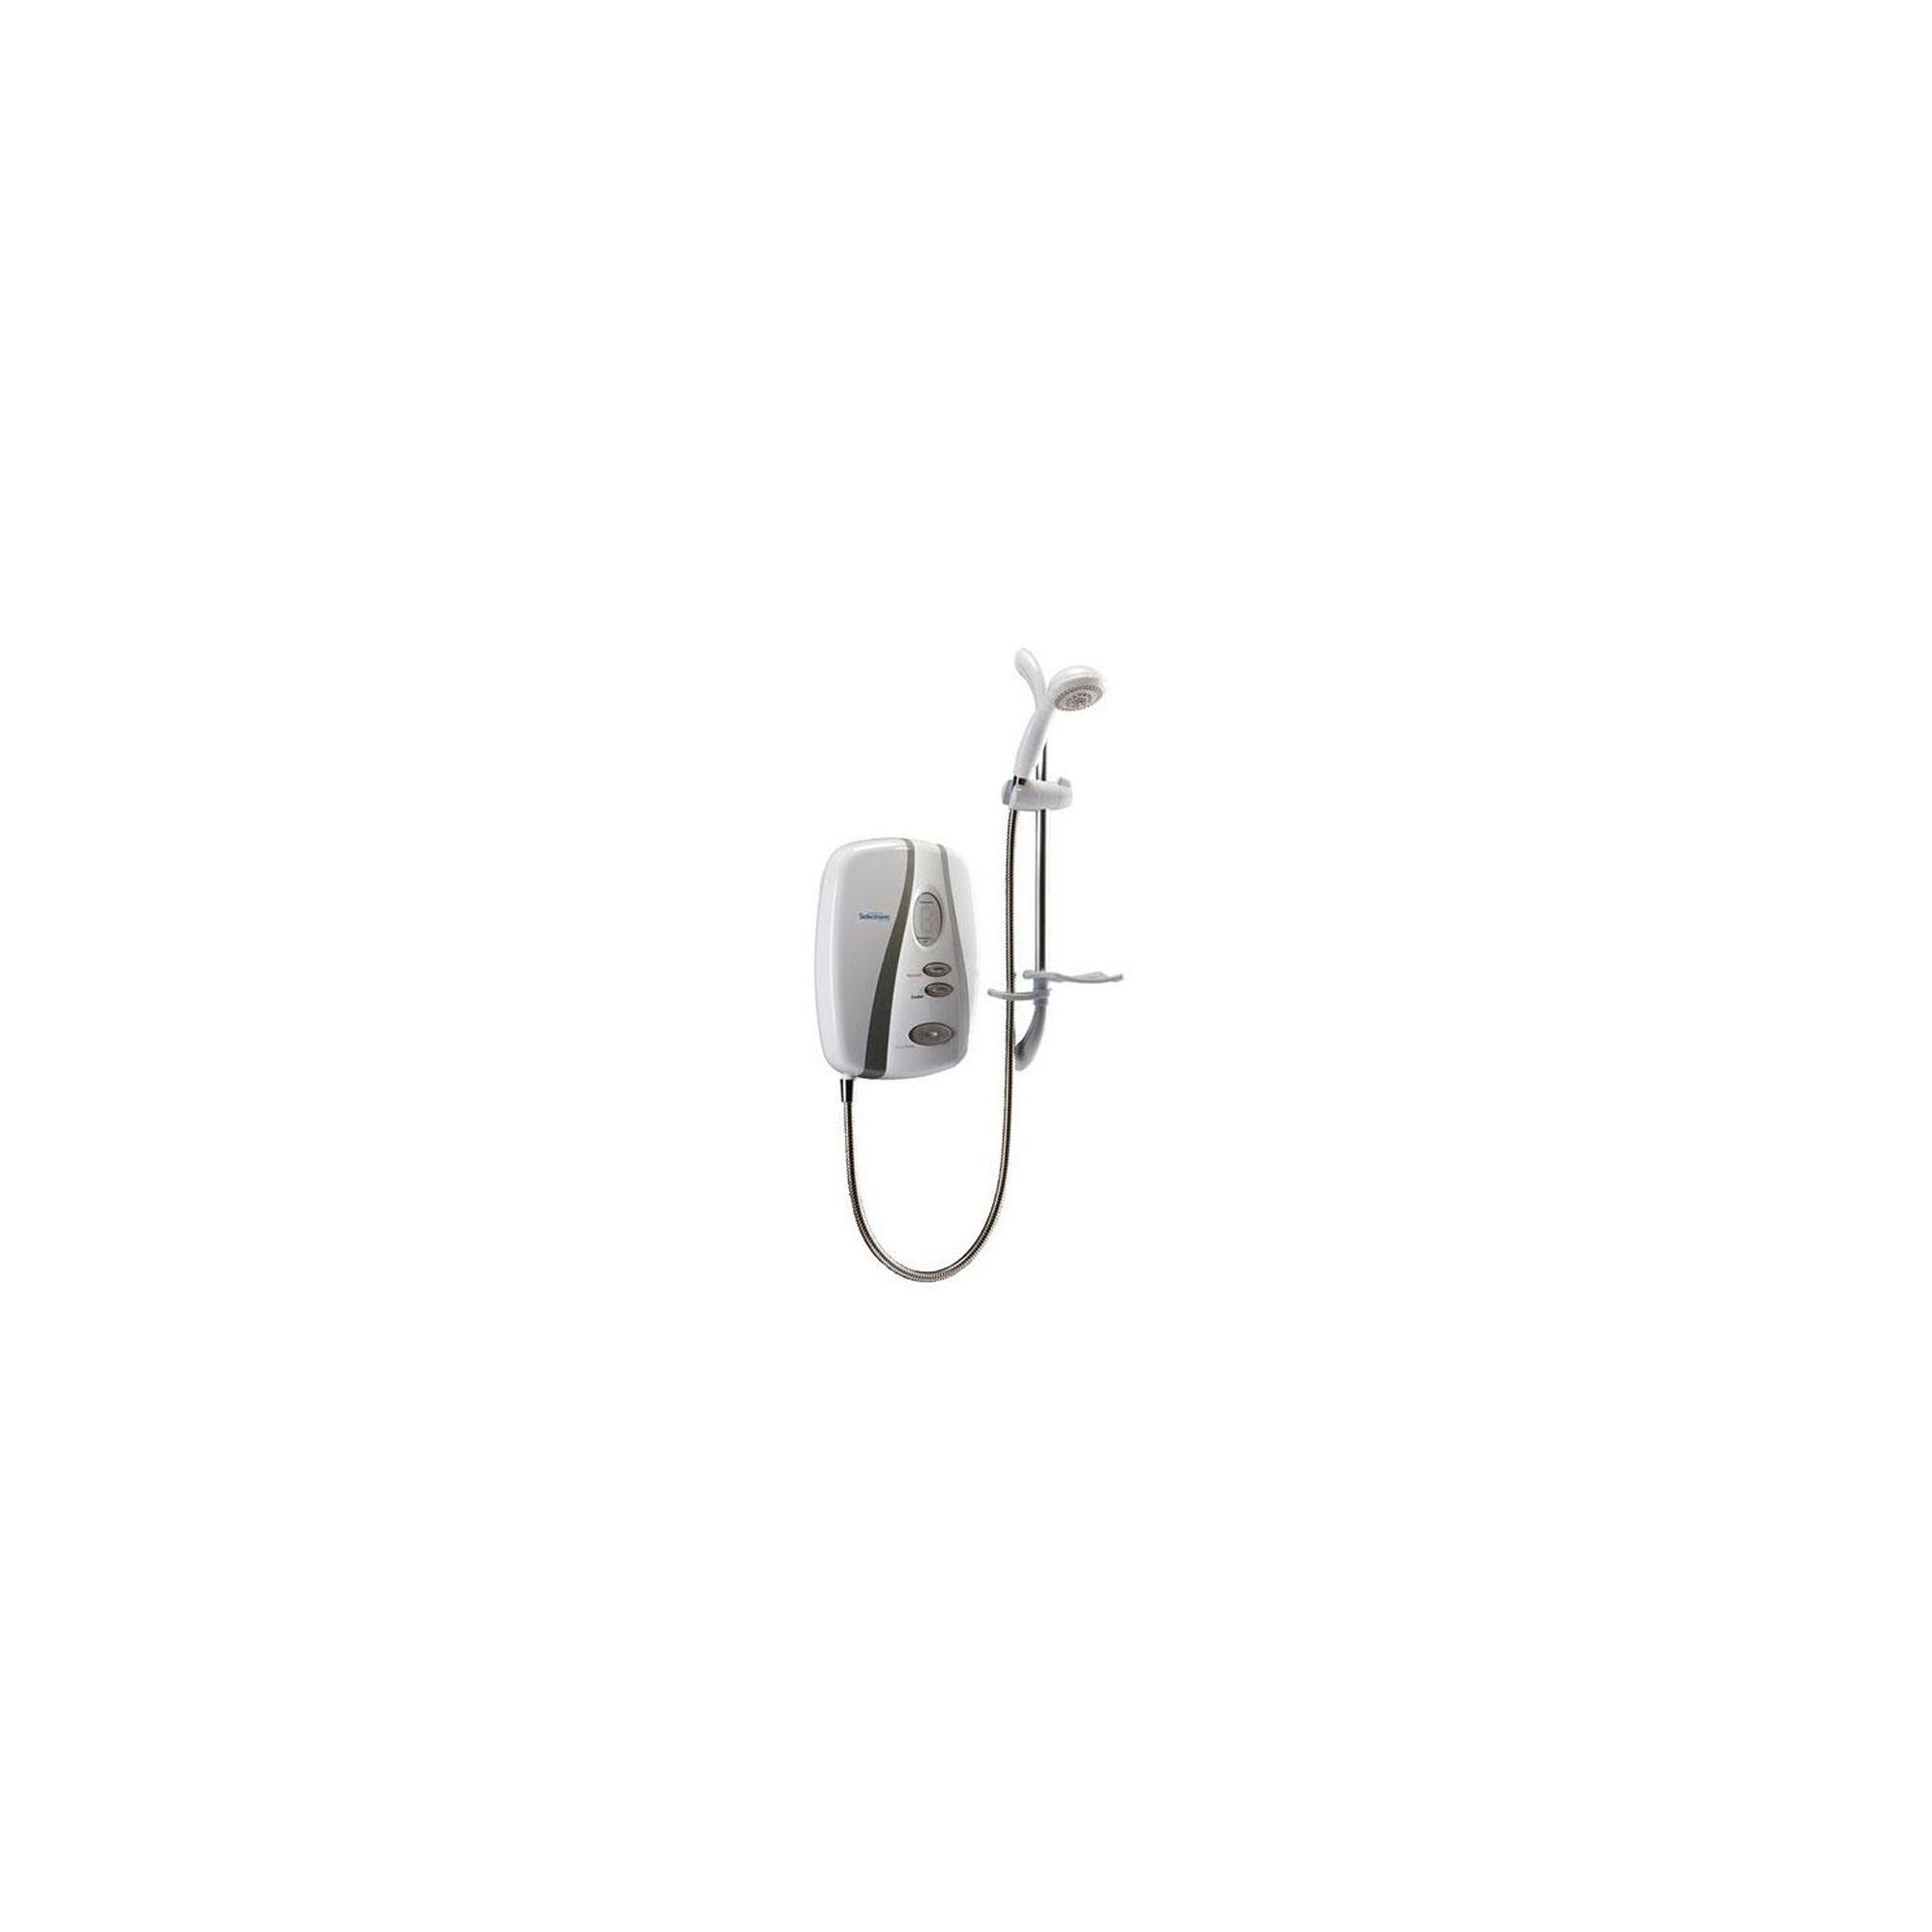 Redring Selectronic Premier Plus Electric Shower White/Chrome 8.5kW at Tesco Direct